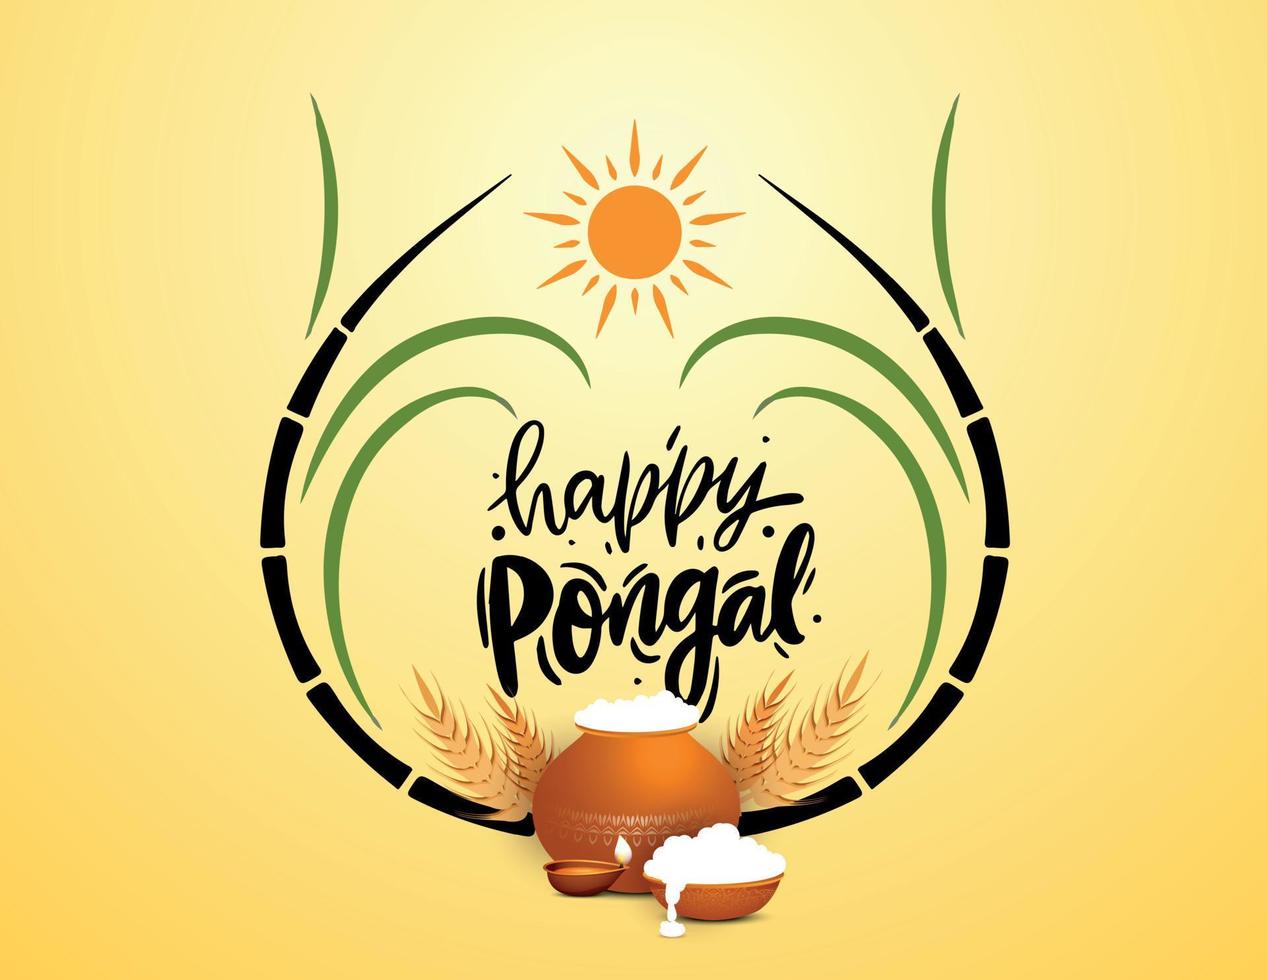 illustration of Happy Pongal Holiday Harvest Festival of Tamil ...